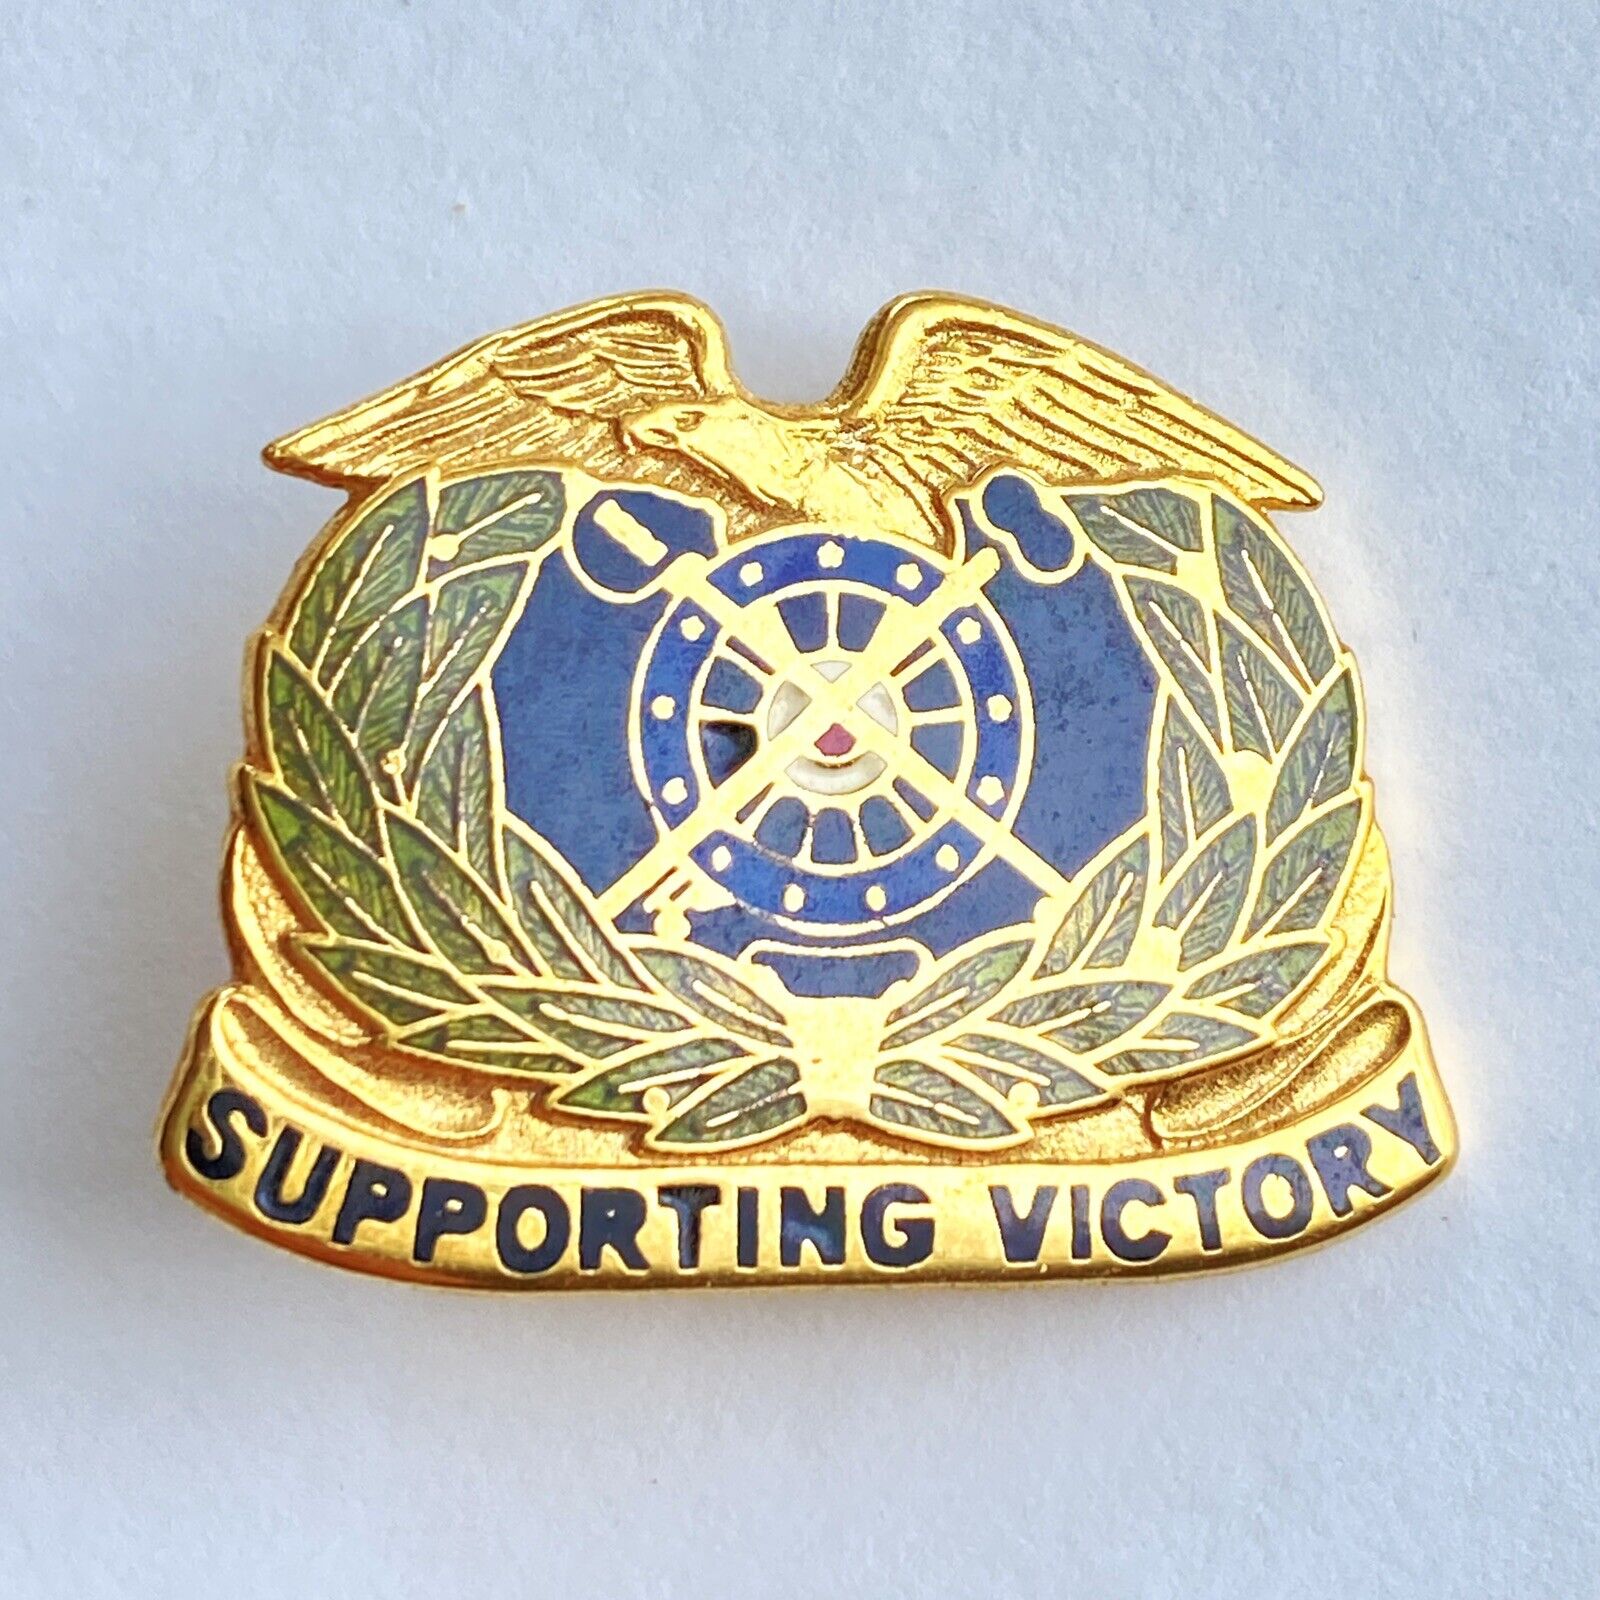 Vintage US Army Quartermaster Corps Supporting Victory Crest Enamel Pin 1.4”